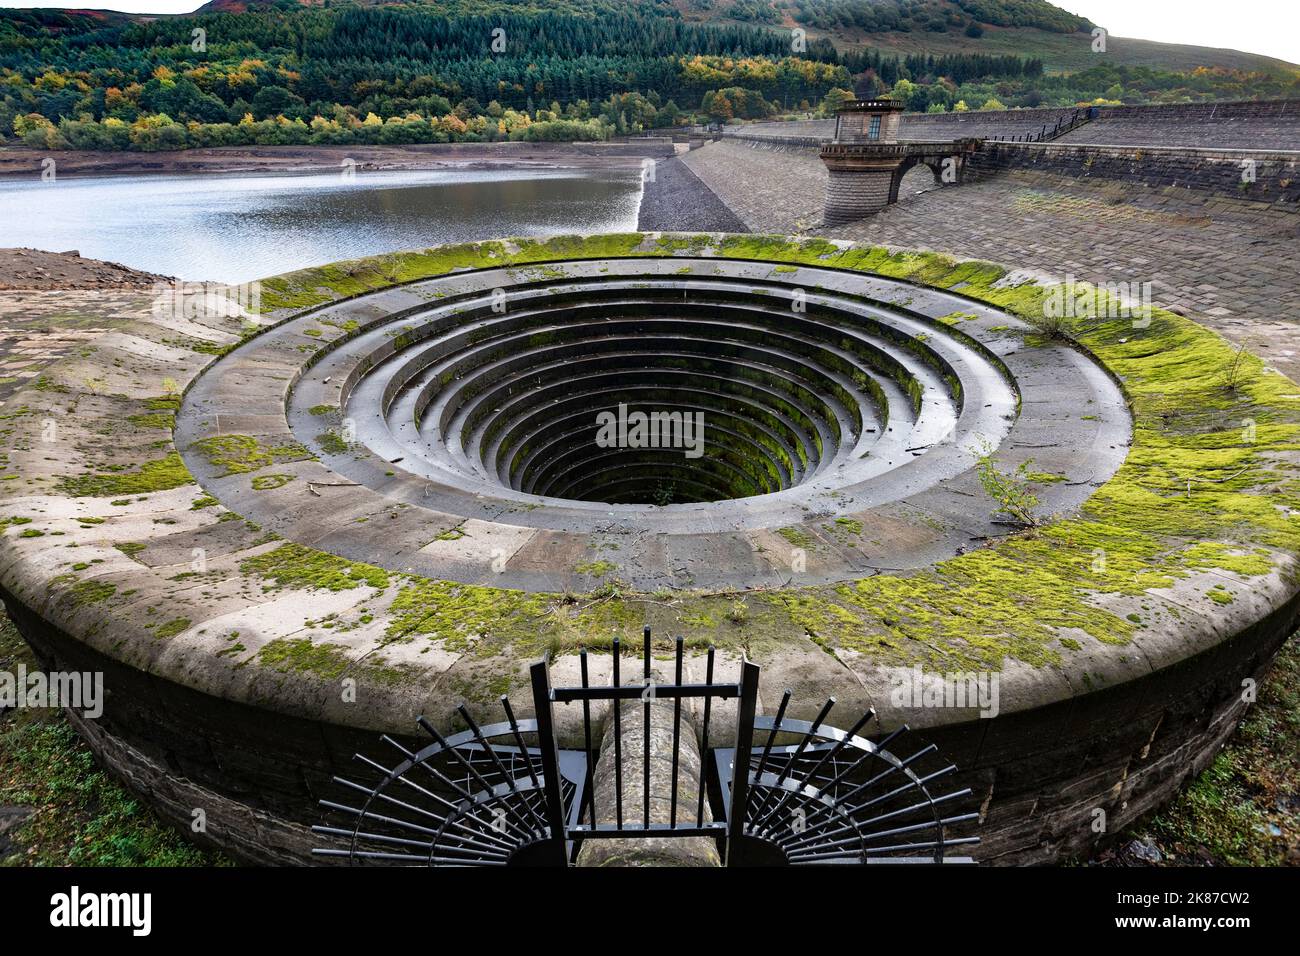 A Plughole drain at Ladybower reservoir in the Peak District at low water level. Stock Photo